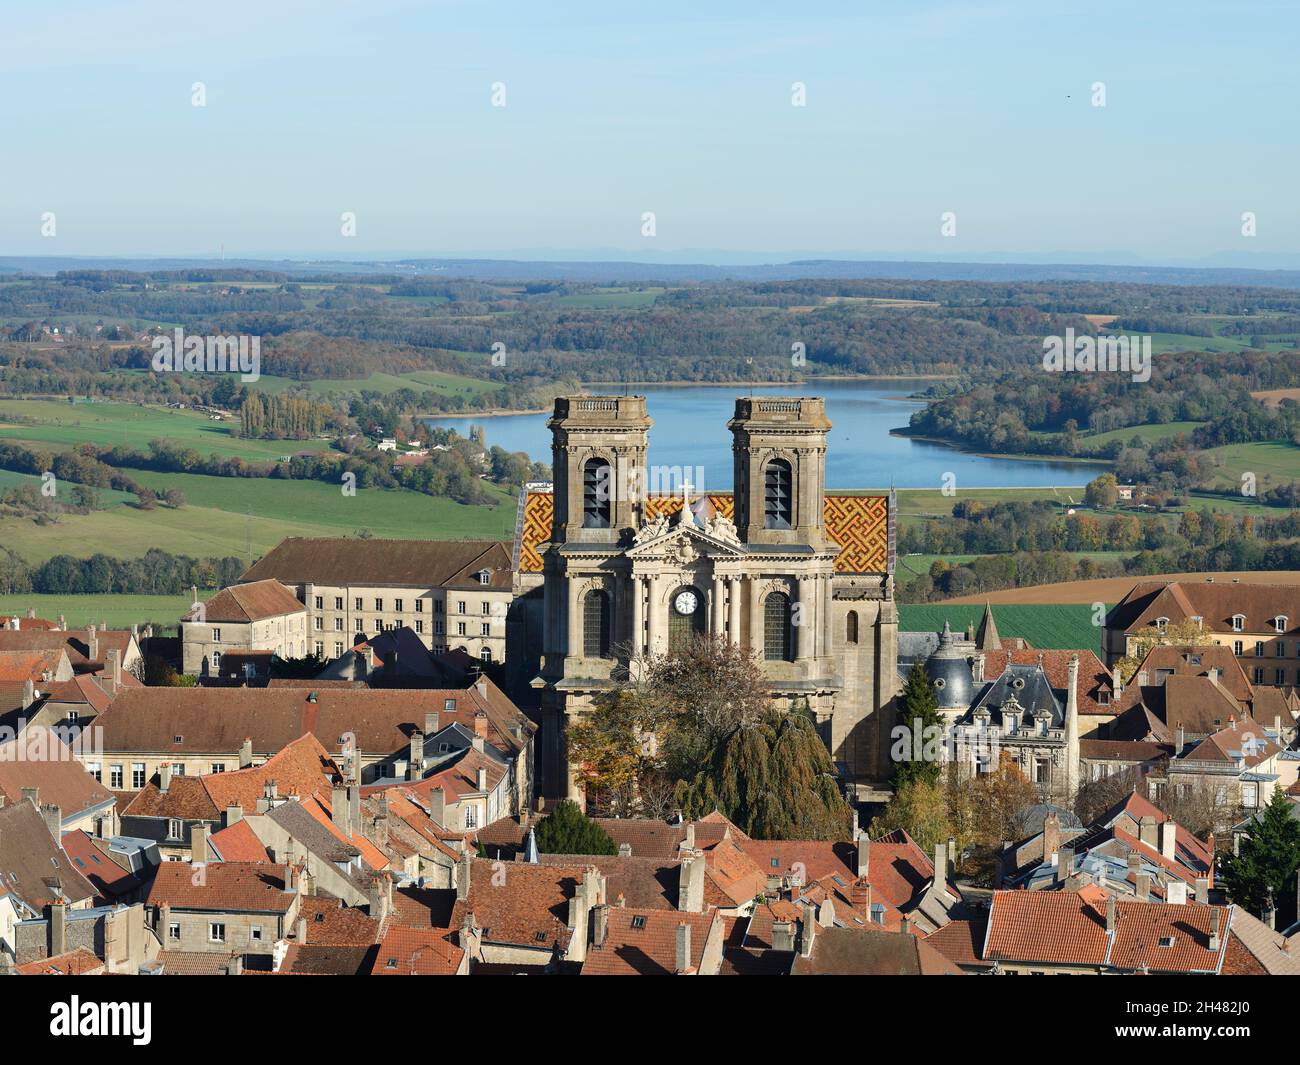 AERIAL VIEW. Cathedral of Saint-Mammès with the Lake Liez in the distance. Langres, Haute-Marne, Grand Est, France. Stock Photo